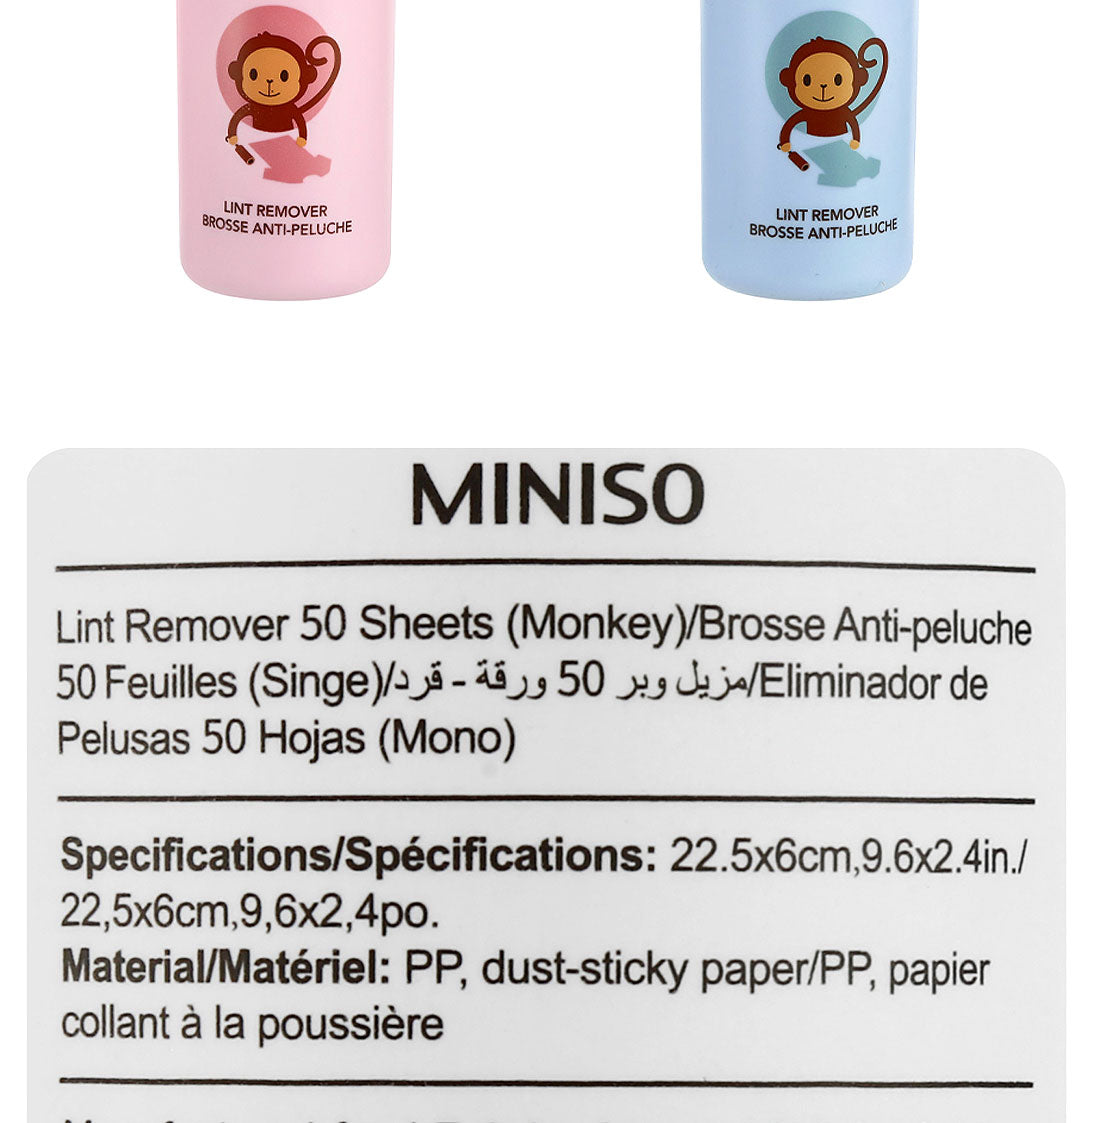 MINISO LINT REMOVER 50 SHEETS (MONKEY) 2008124110108 LINT REMOVER